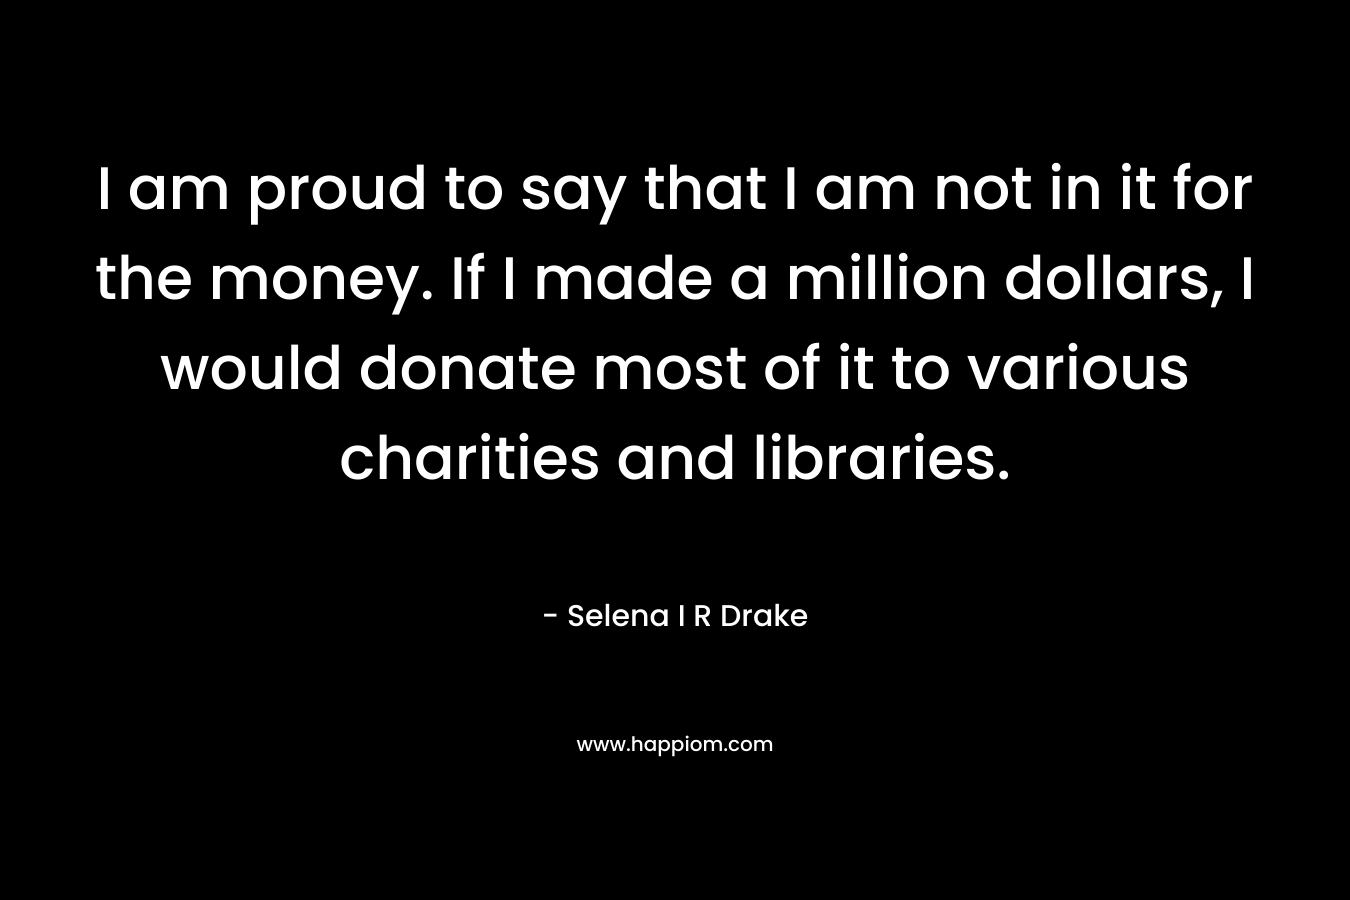 I am proud to say that I am not in it for the money. If I made a million dollars, I would donate most of it to various charities and libraries. – Selena I R Drake